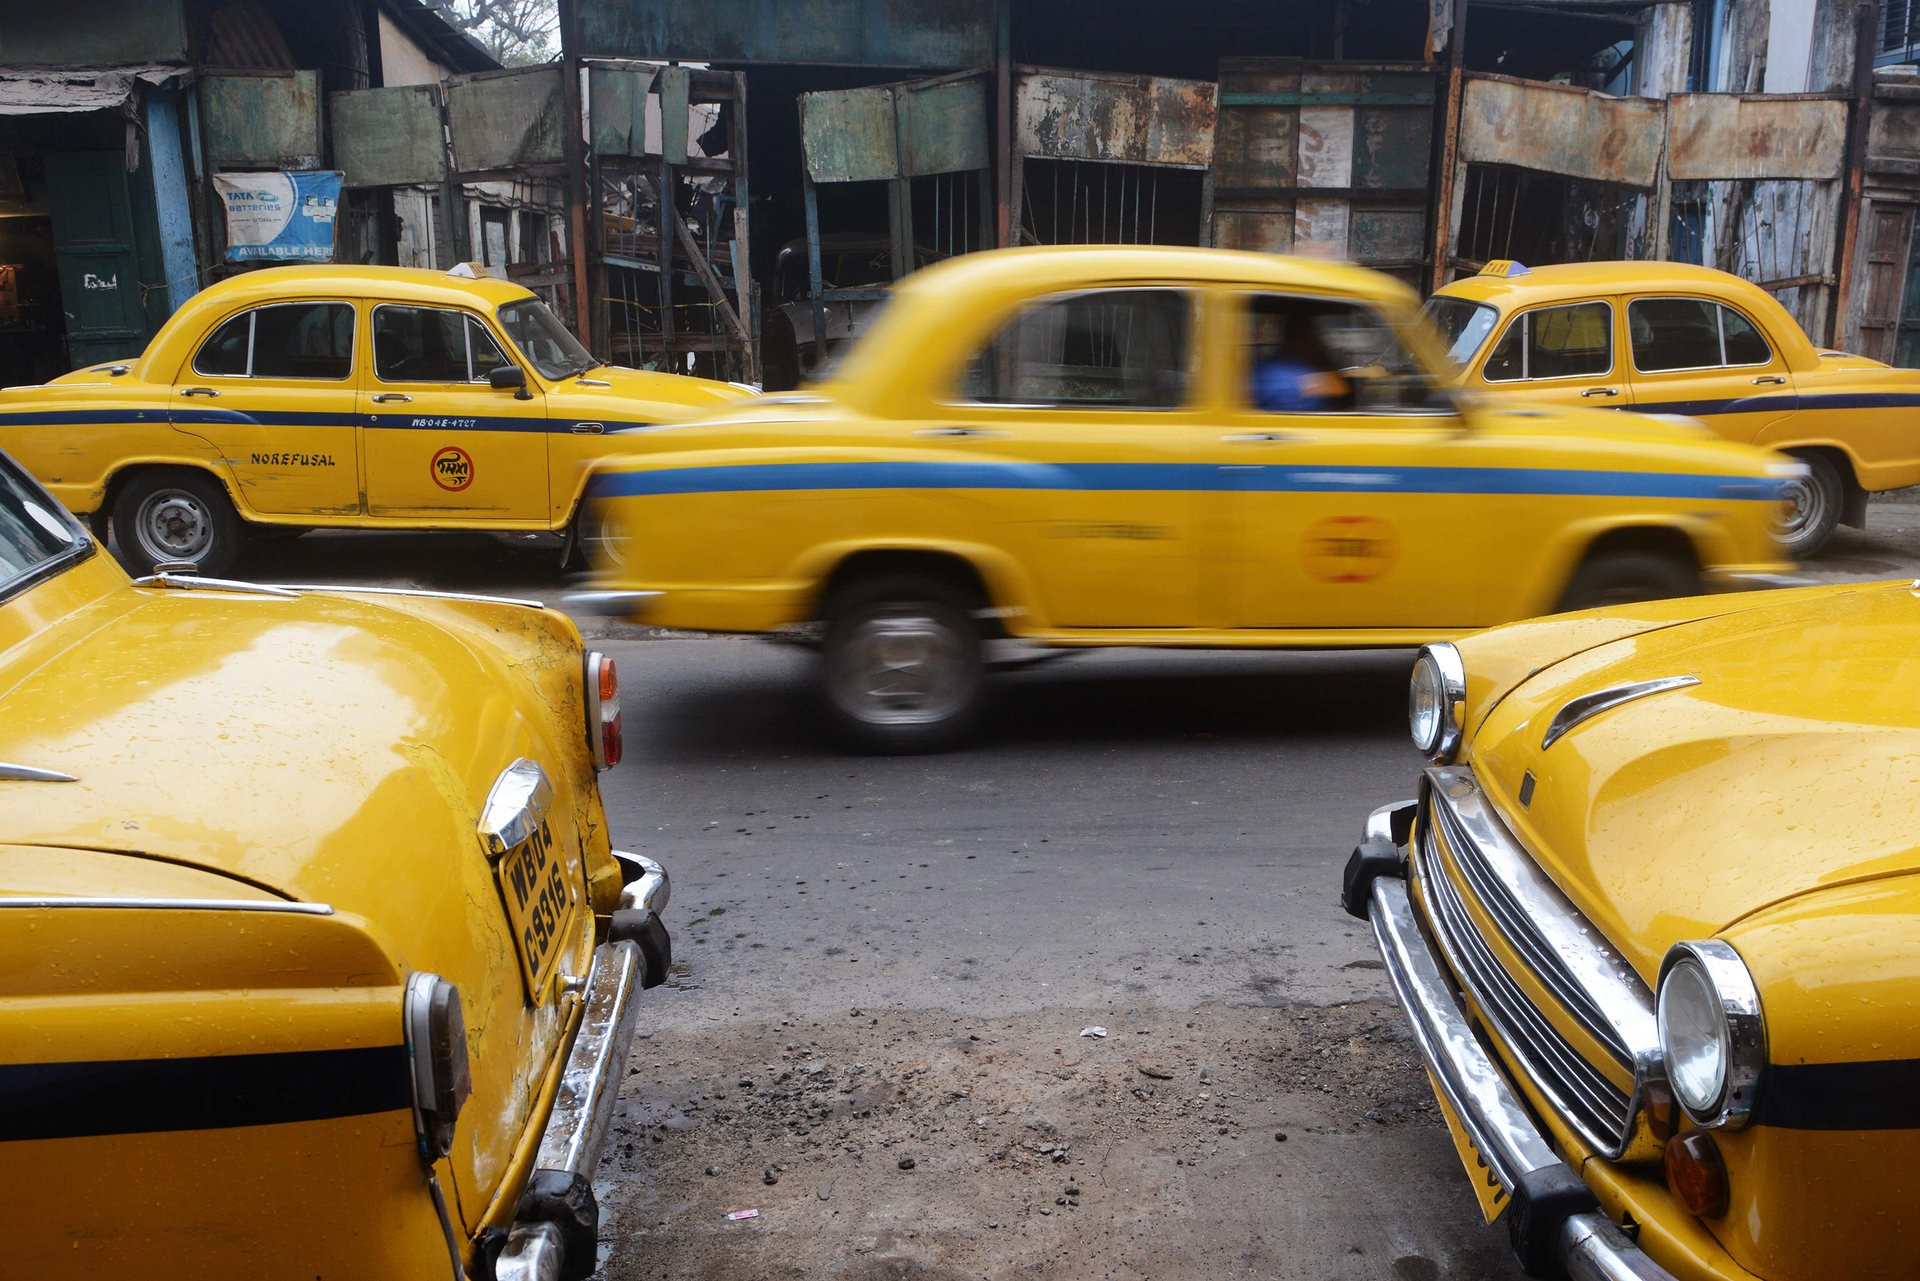 A fleet of yellow Hindustan Ambassador taxis on a street in the capital of West Bengal. Indiaâs Hindustan Motors has sold its Ambassador car division to Peugeot for Â£9.6m, Kolkata, India. PHOTO: AFP